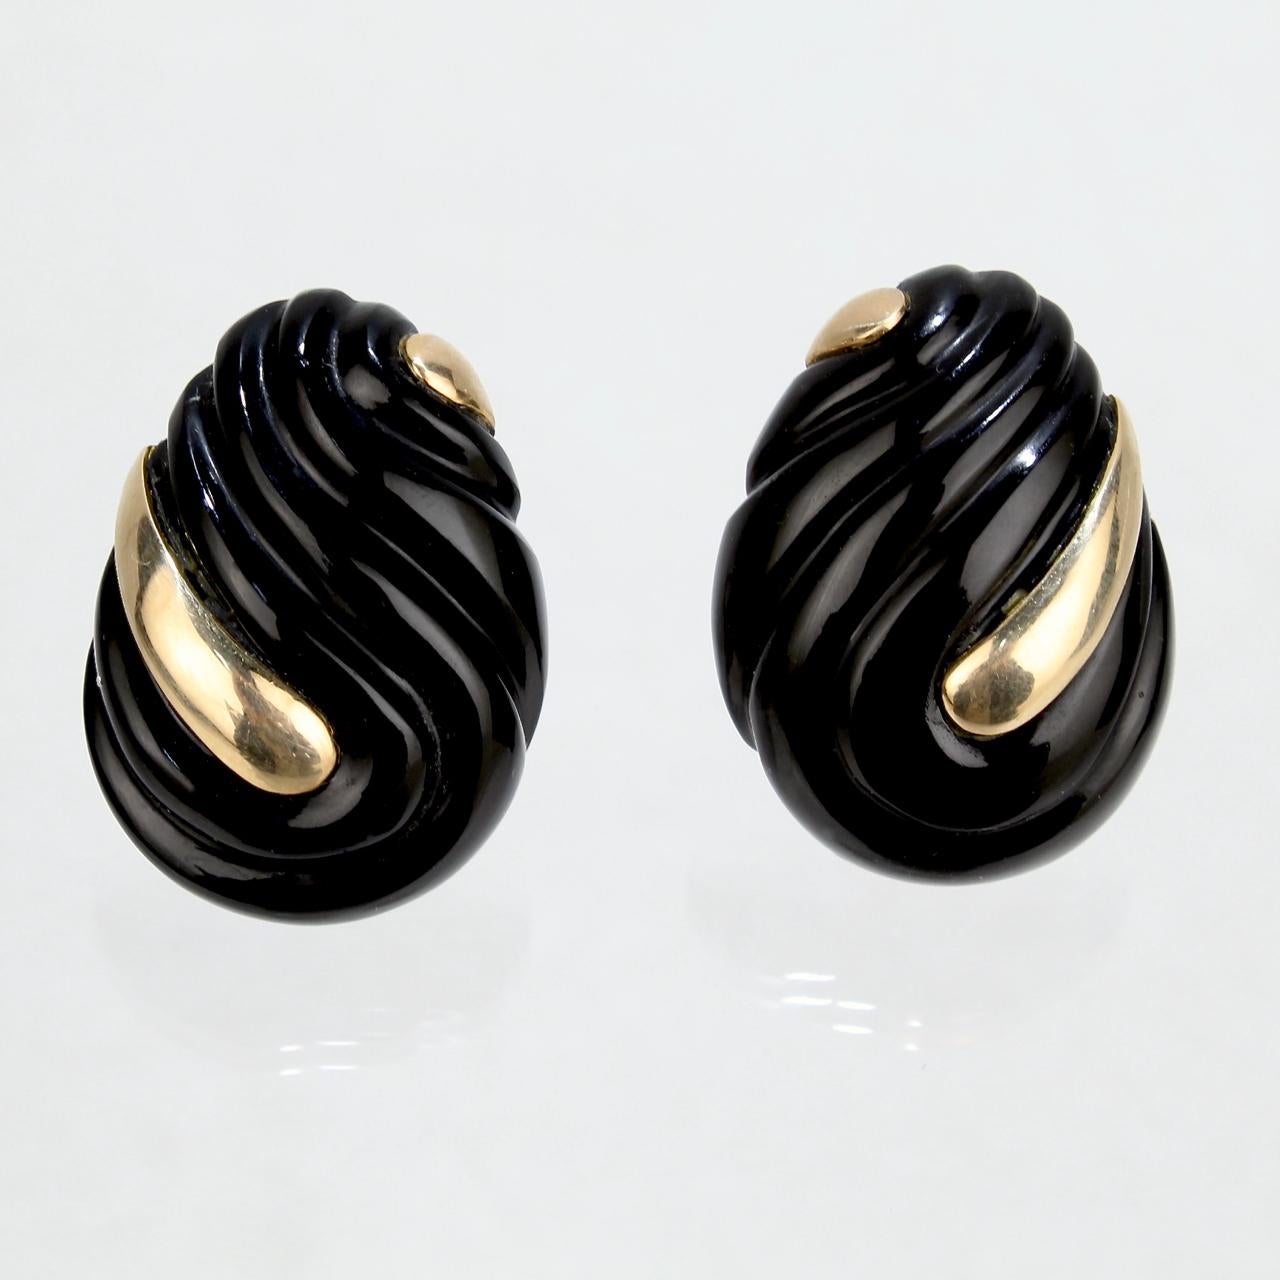 A cool pair of carved onyx and gold earrings.

Comprised of tear-drop shaped carved onyx inlaid with gold accents.

With omega clip backs for extra security when wearing.

Marked to one post 14k for gold fineness.

A fun, cool retro pair of very